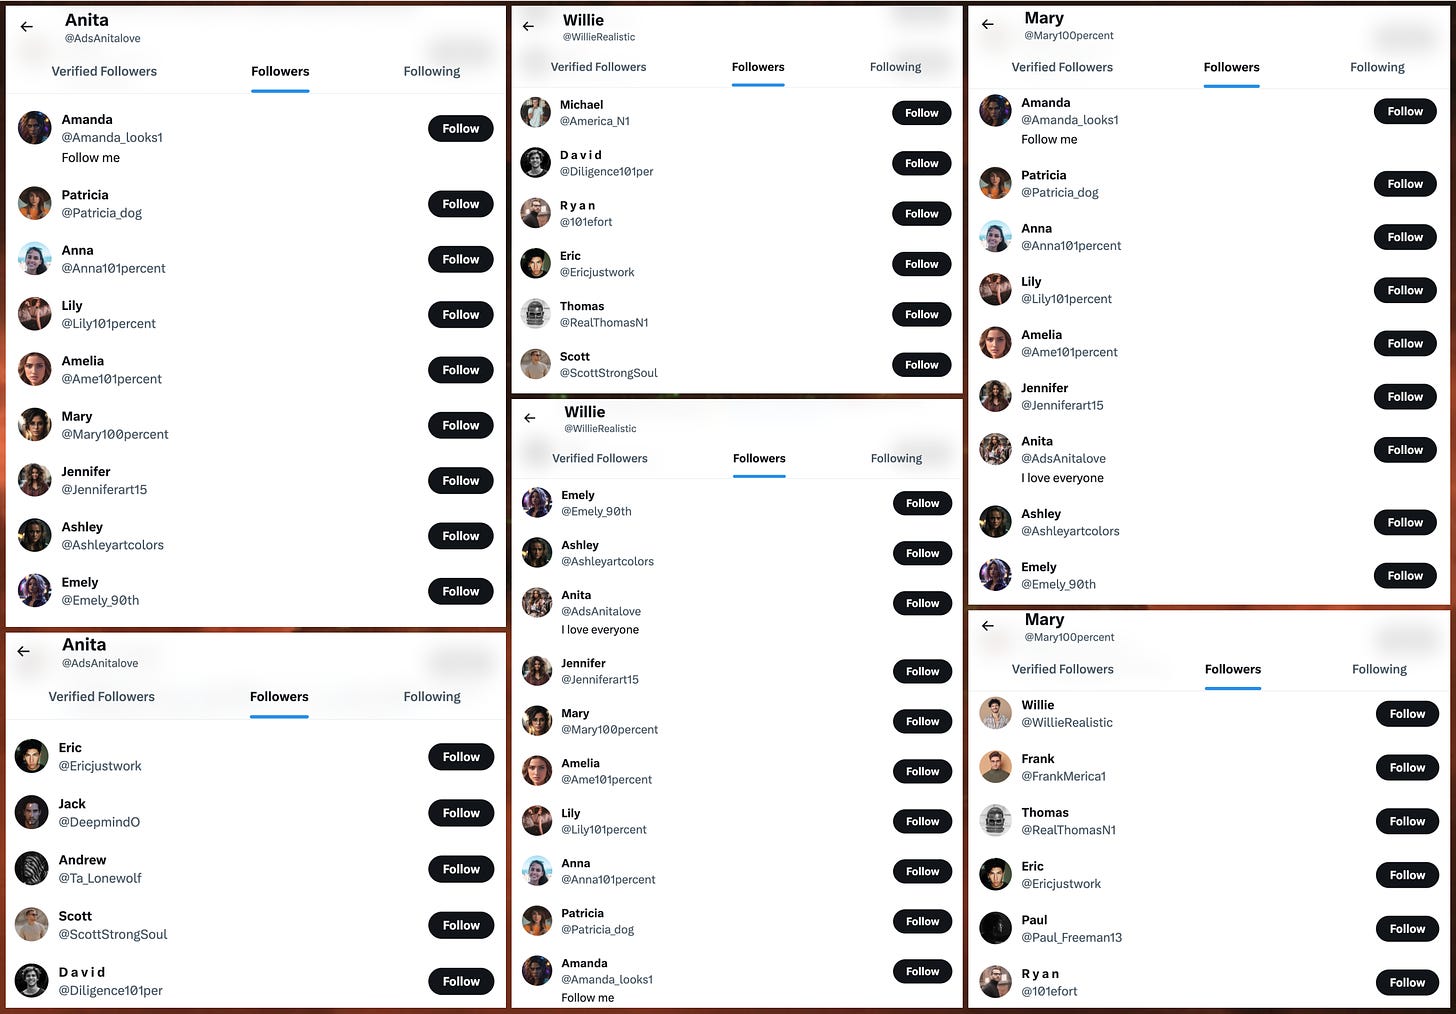 screenshots of the followers of several of the accounts in the spam network